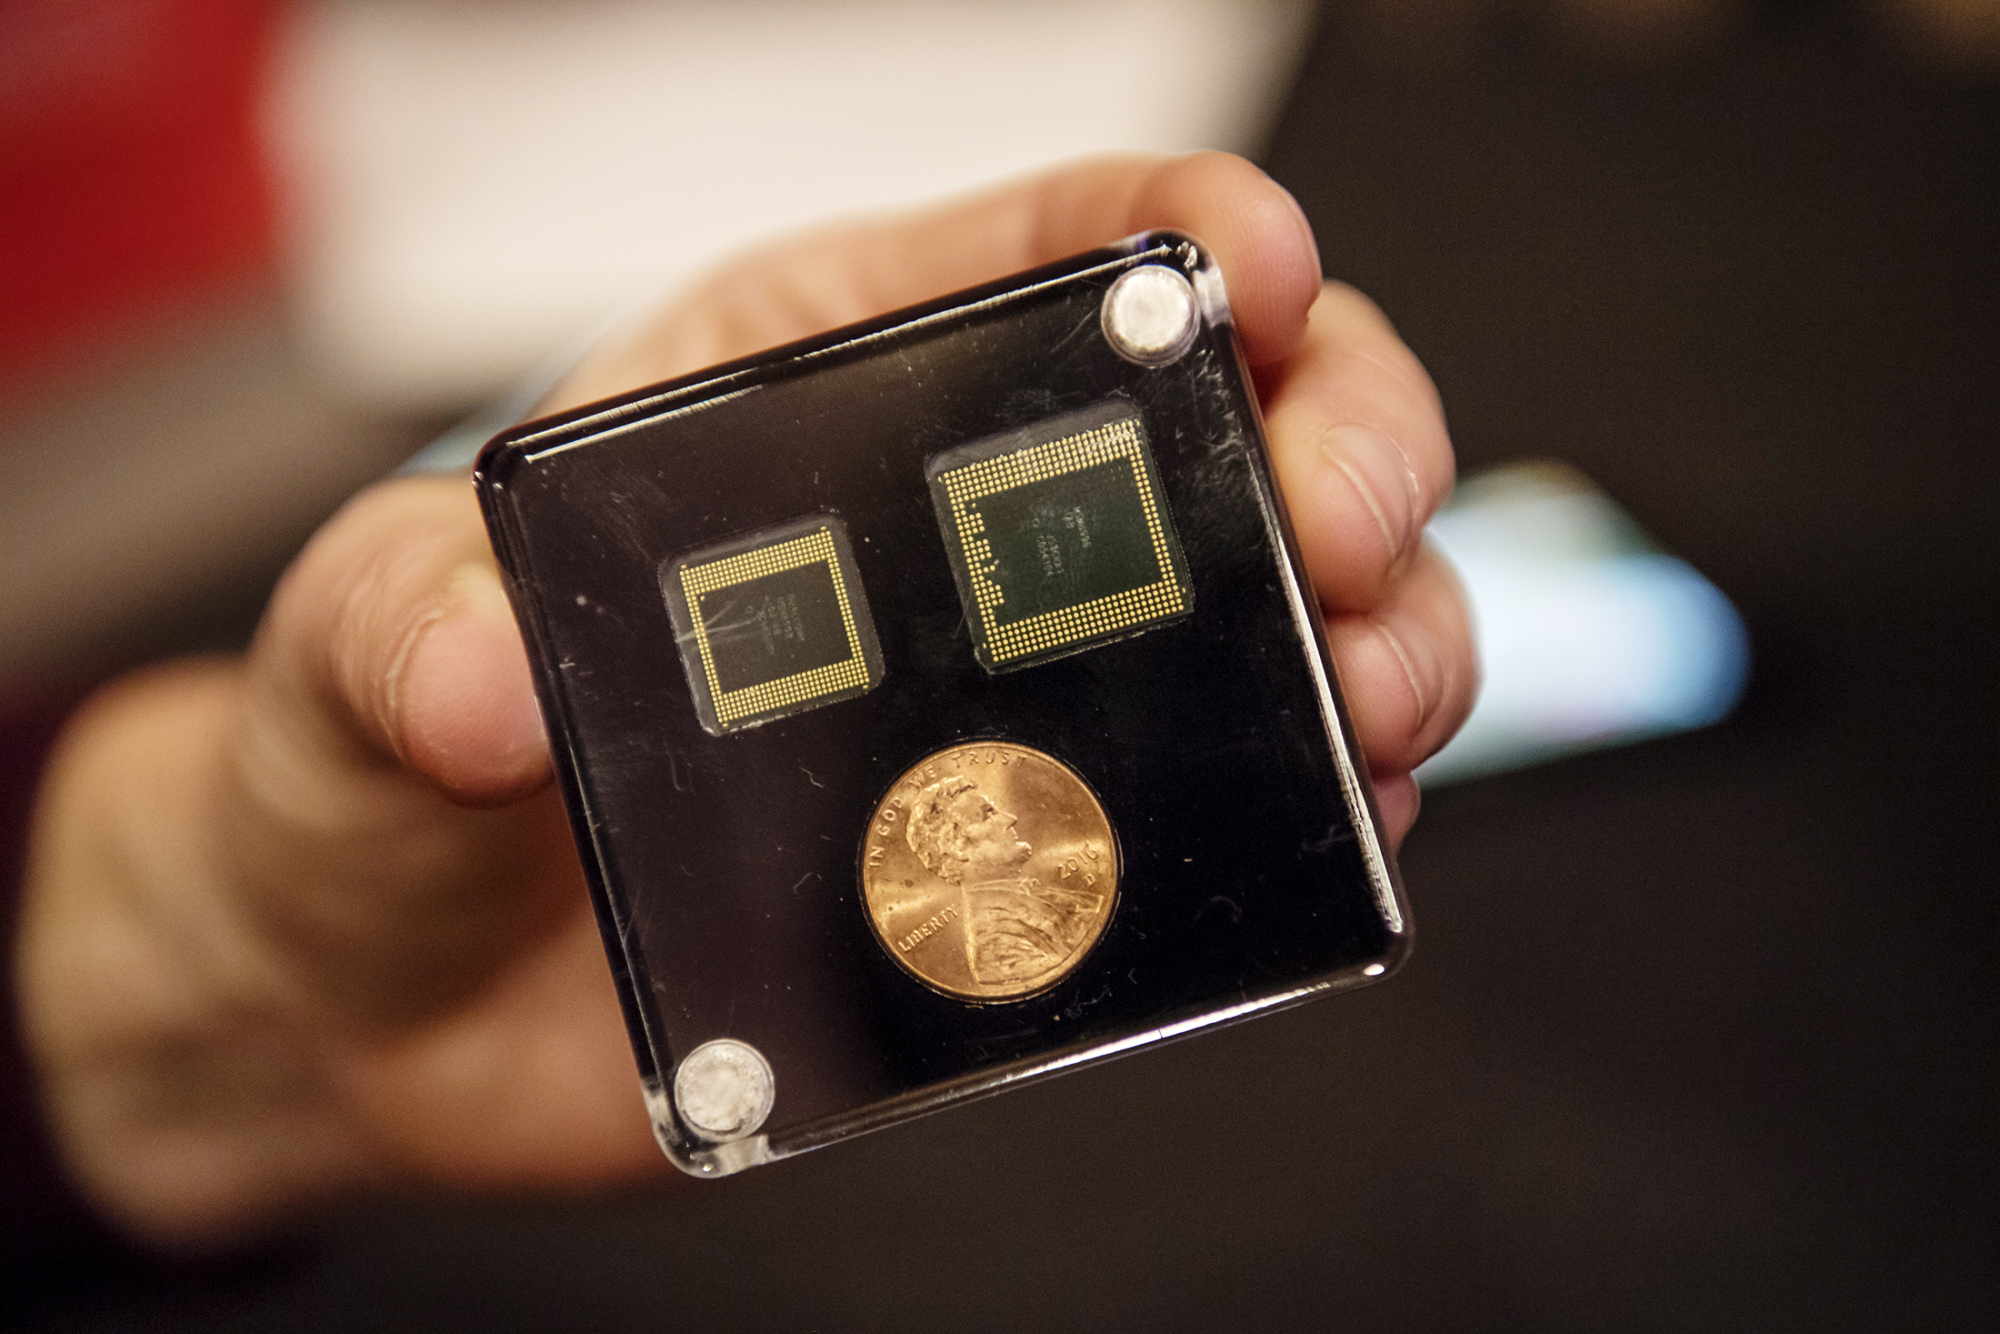 The Qualcomm Inc. 820, left, and the 835 Snapdragon processor at the 2017 Consumer Electronics Show in Las Vegas, Nevada, on Jan. 3, 2017.
